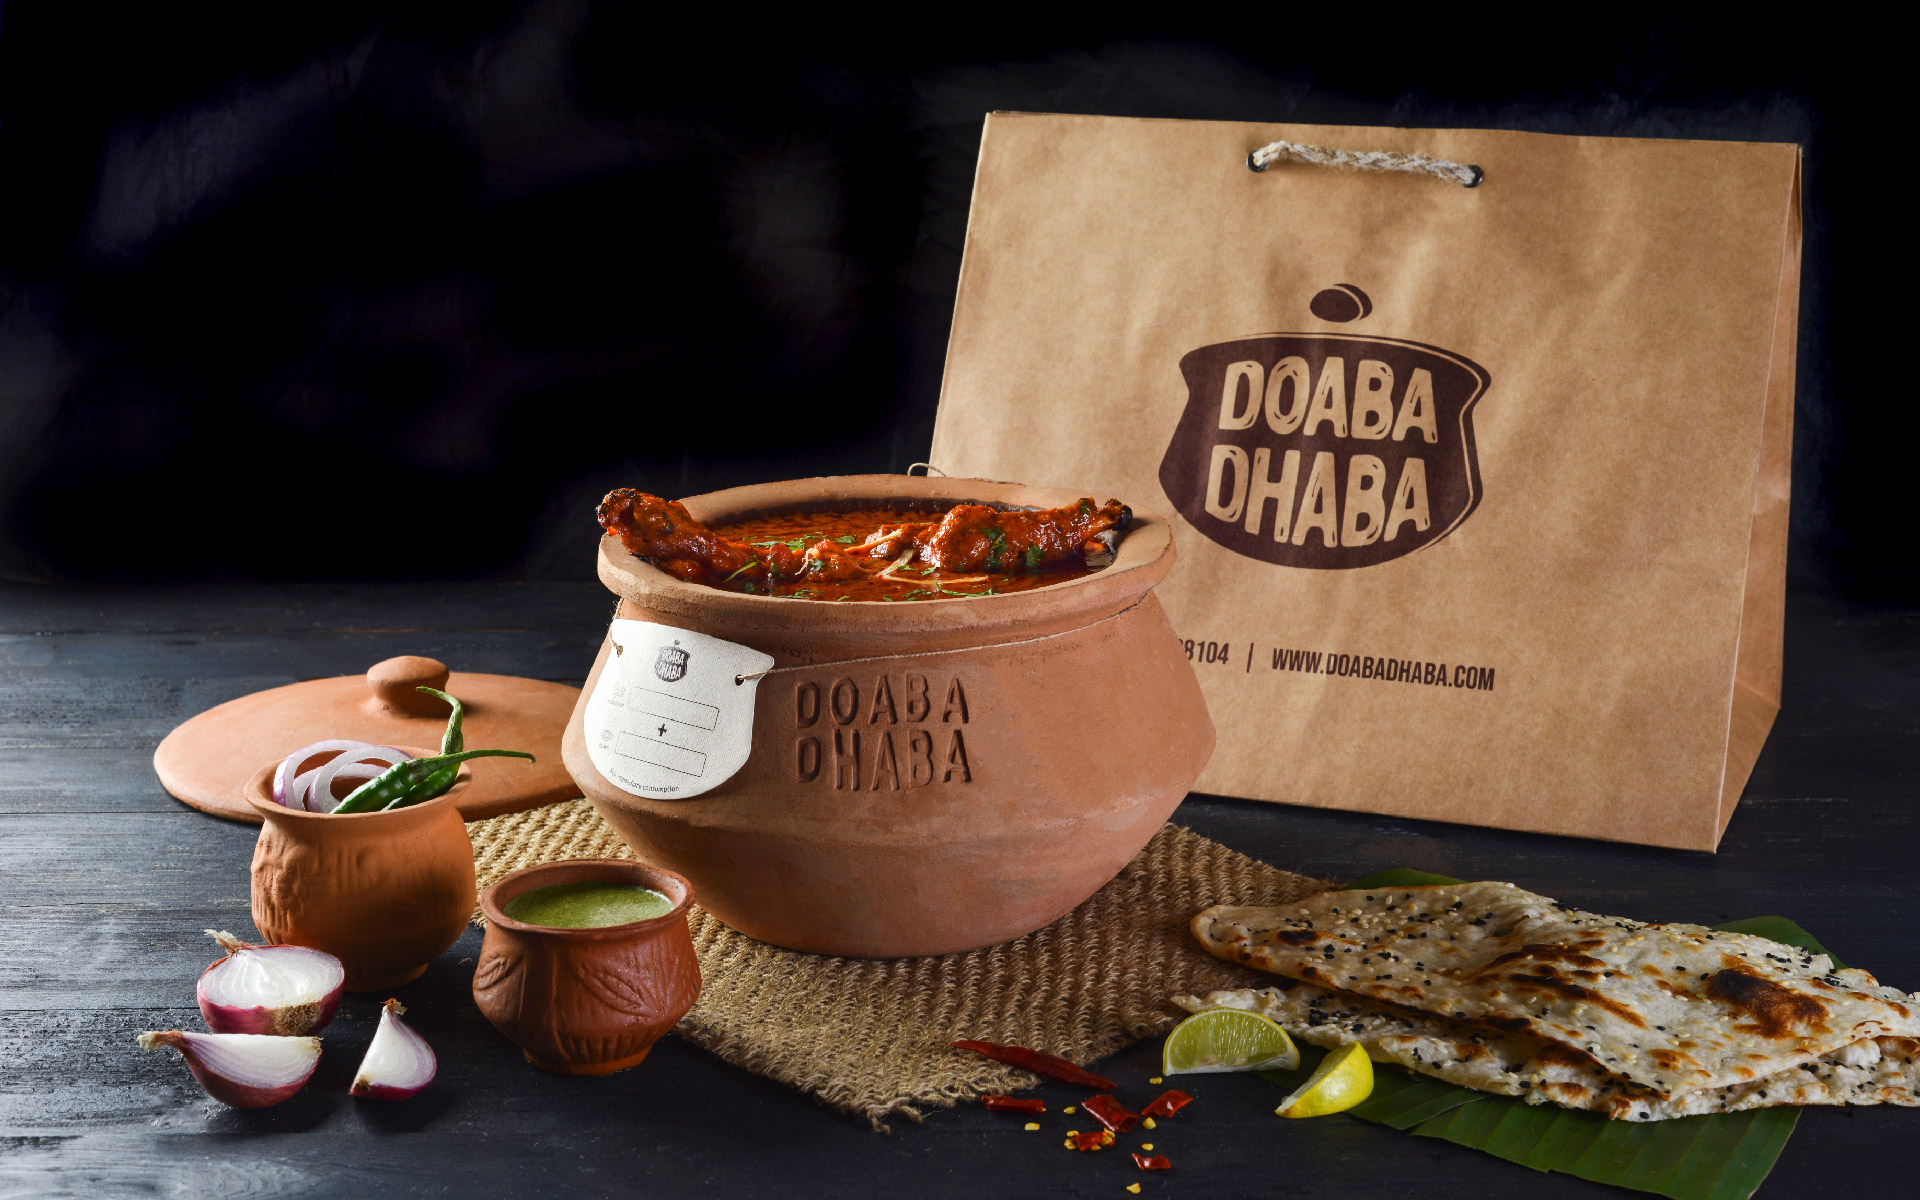 Brand Identity and Packaging Design for Doaba Dhaba Created by Akkshit Khattar